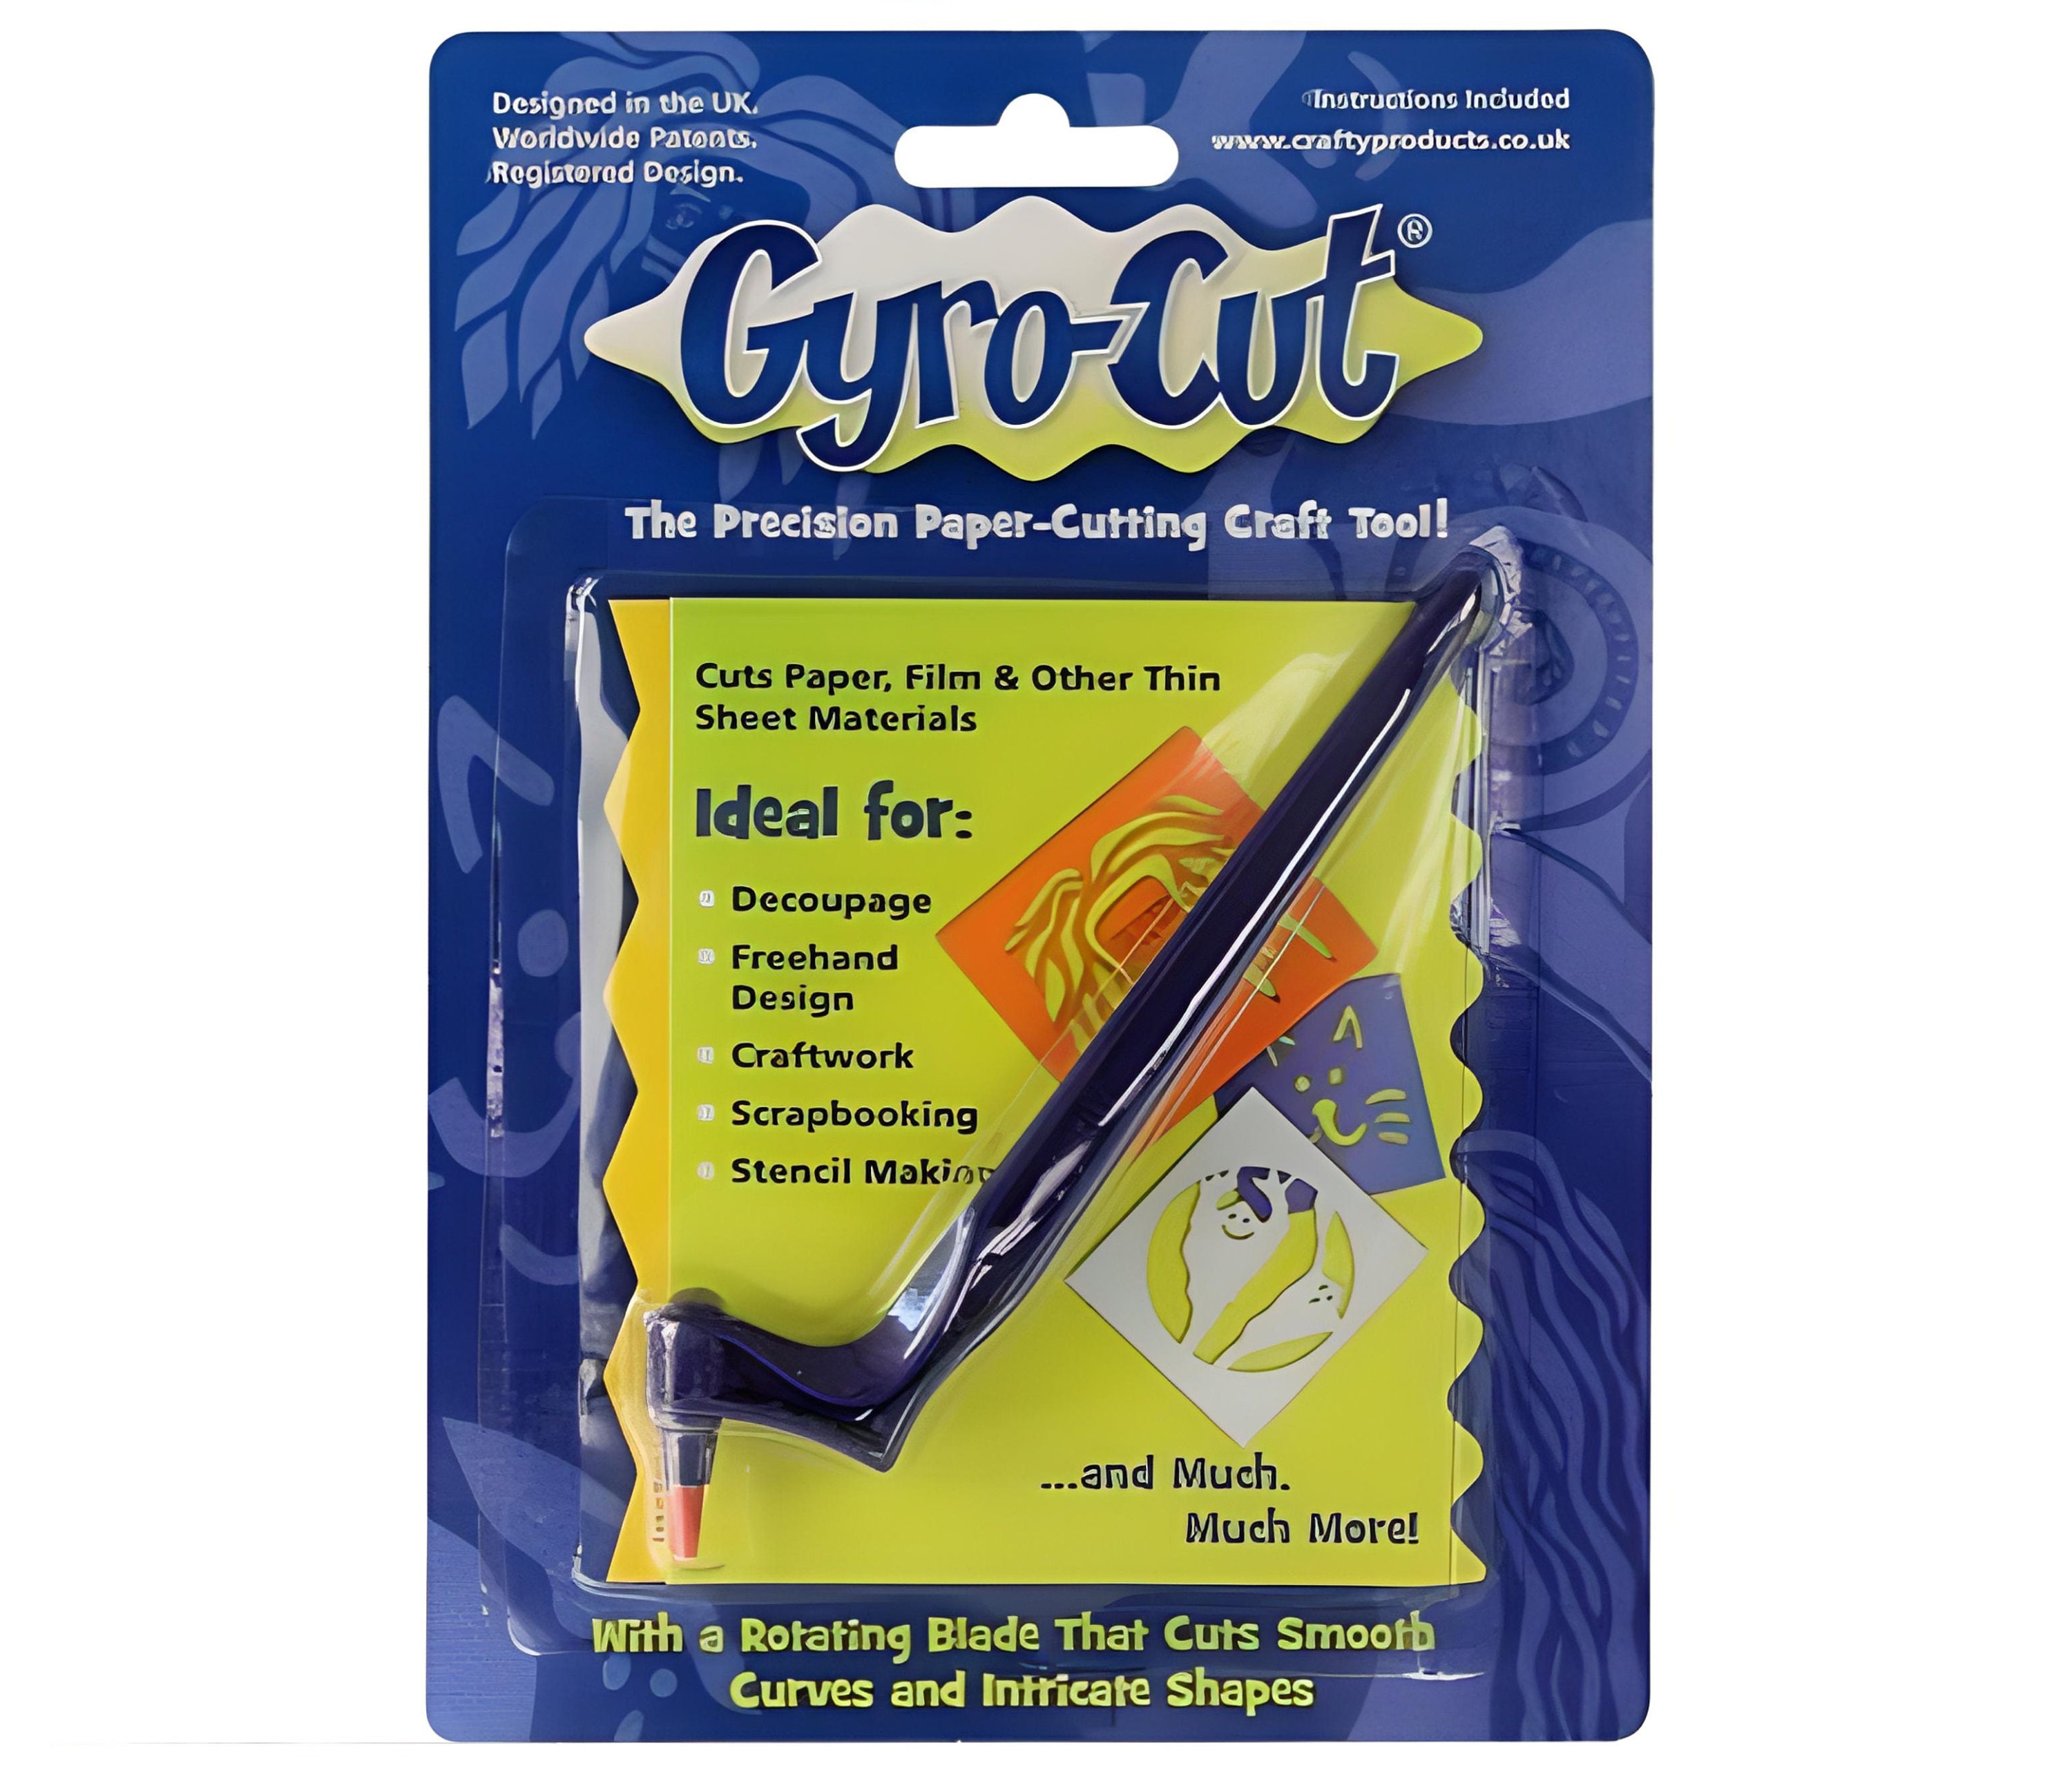 Gyro-cut PRO Starter Kit. Complete With a Gyro-cut PRO Tool